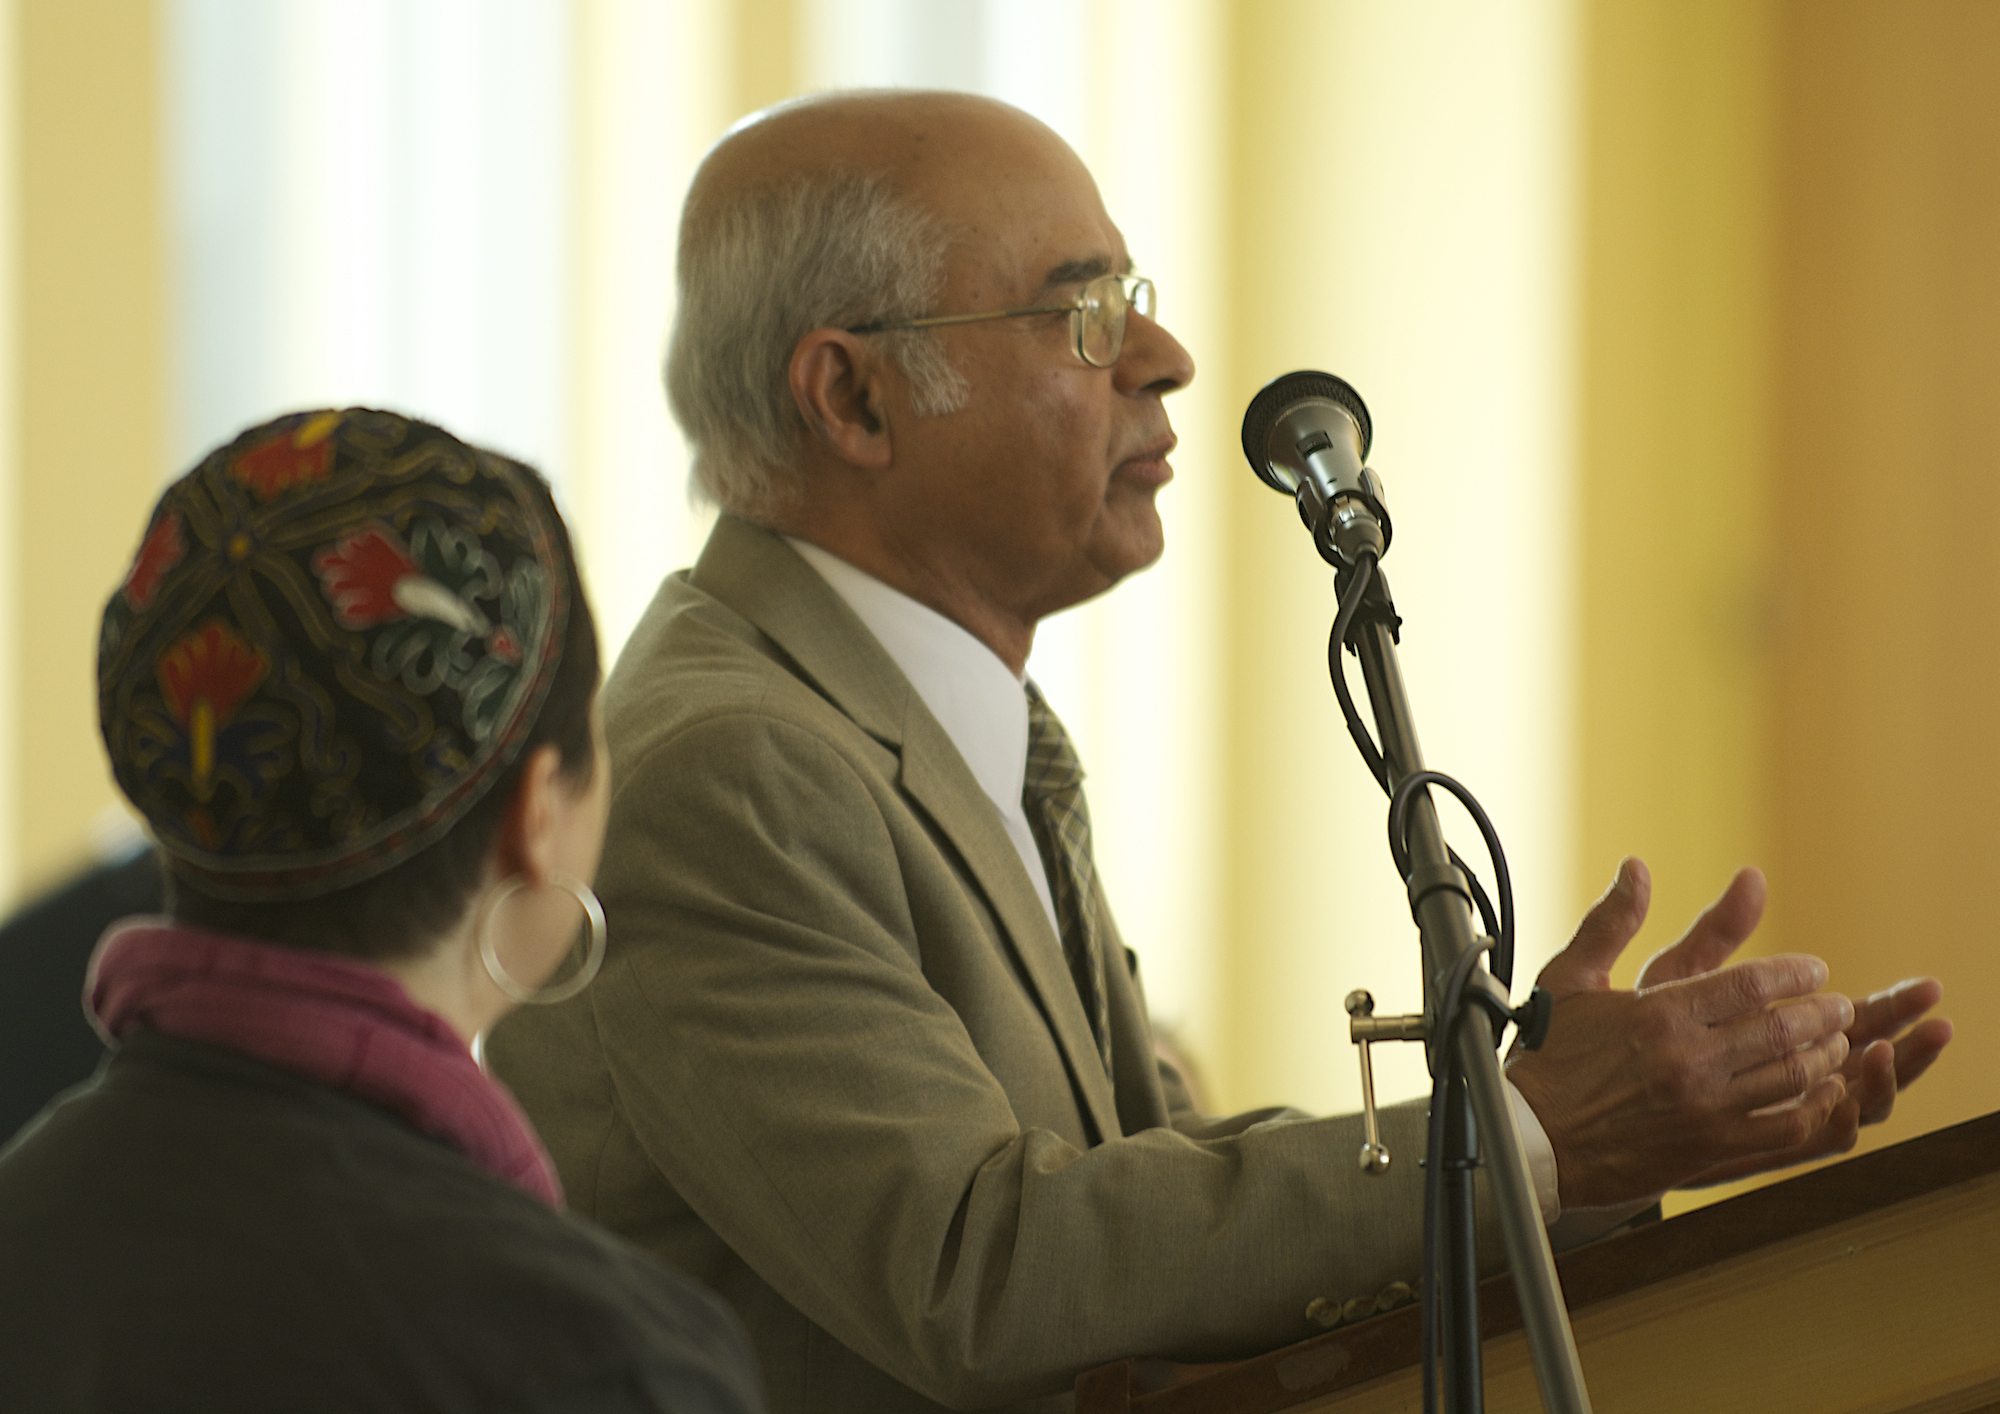 Dr. Khalid Khan of the Islamic Society of Southwest Washington gives a blessing at an interfaith breakfast in 2014.